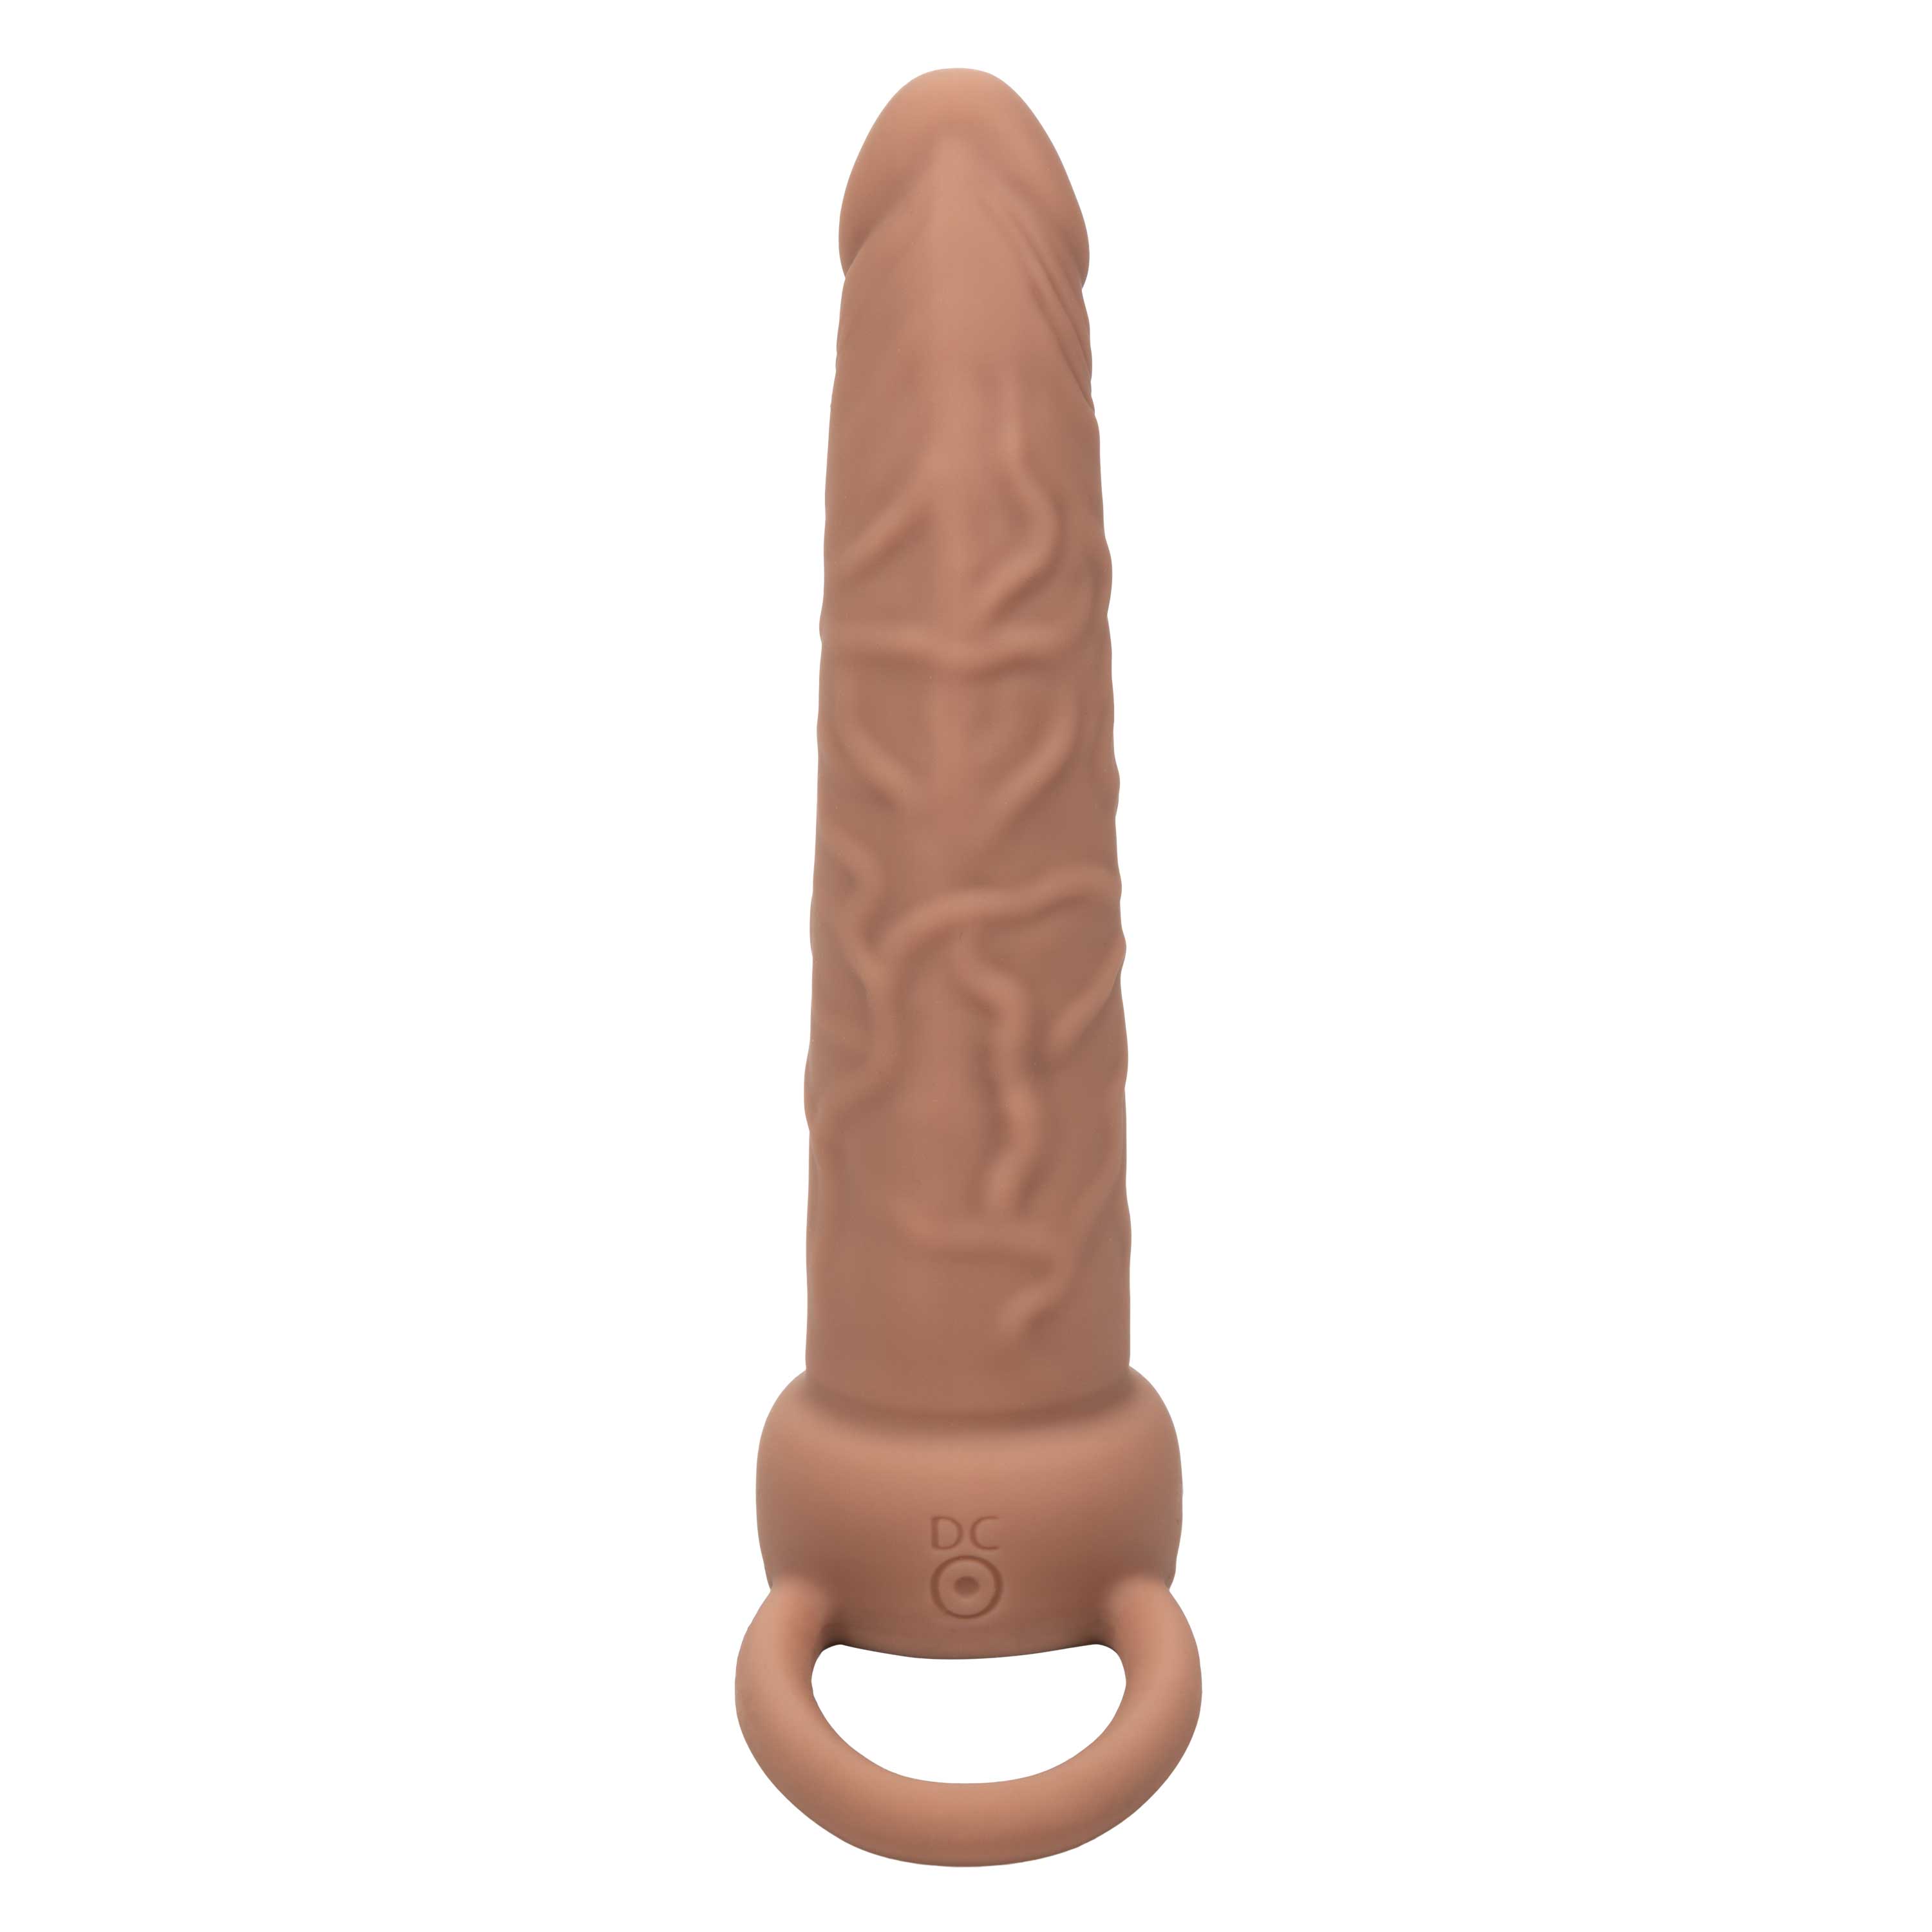 performance maxx rechargeable dual penetrator  brown 